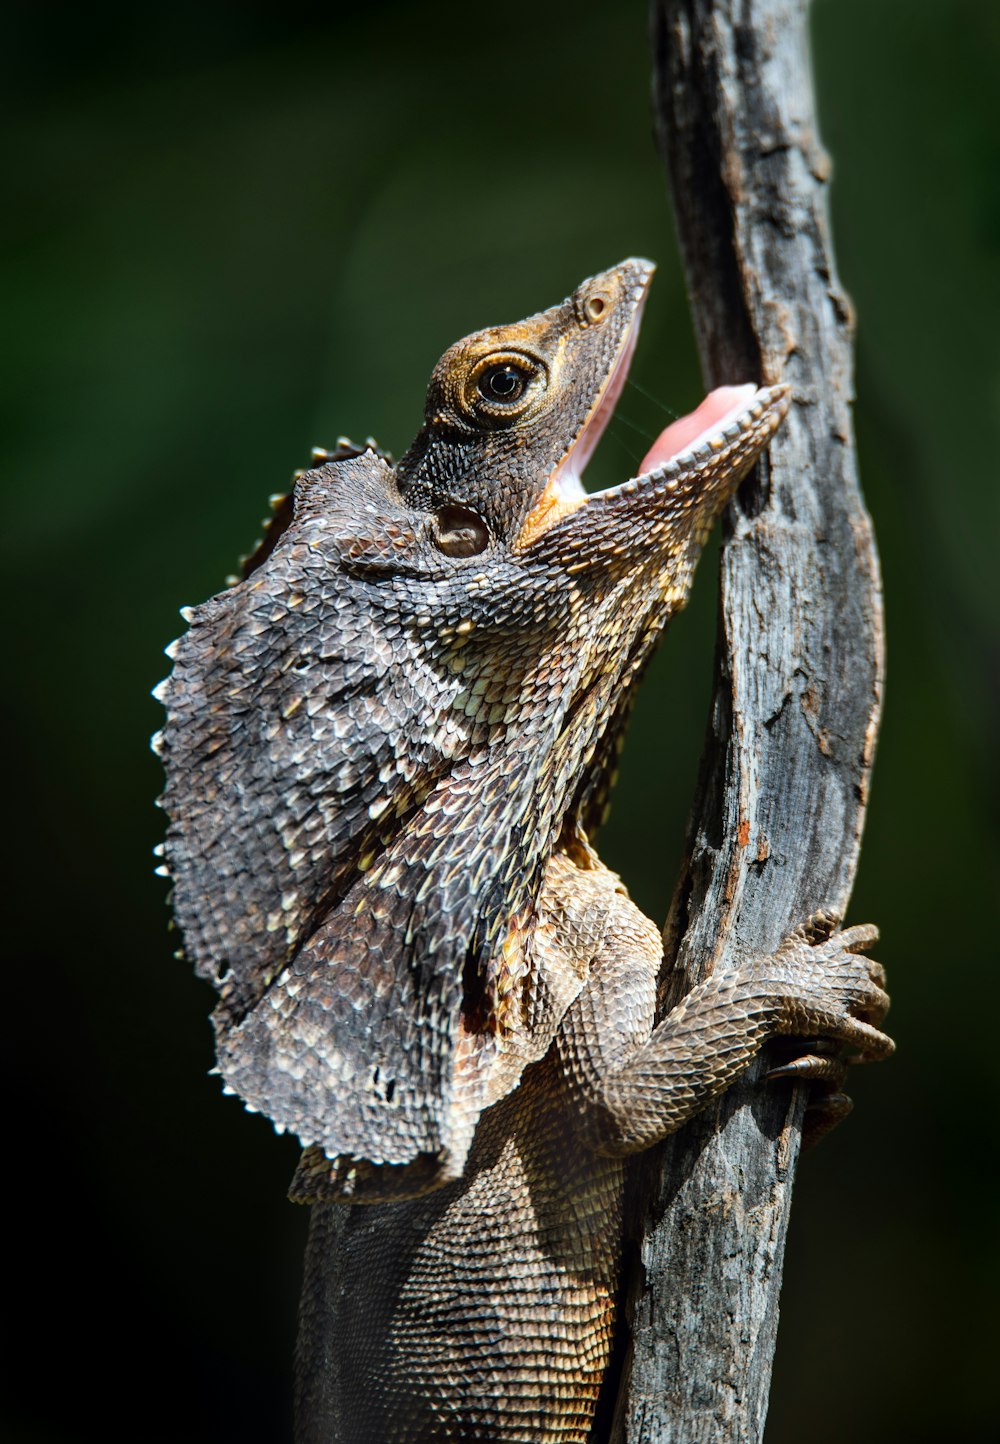 brown and black lizard on gray tree trunk